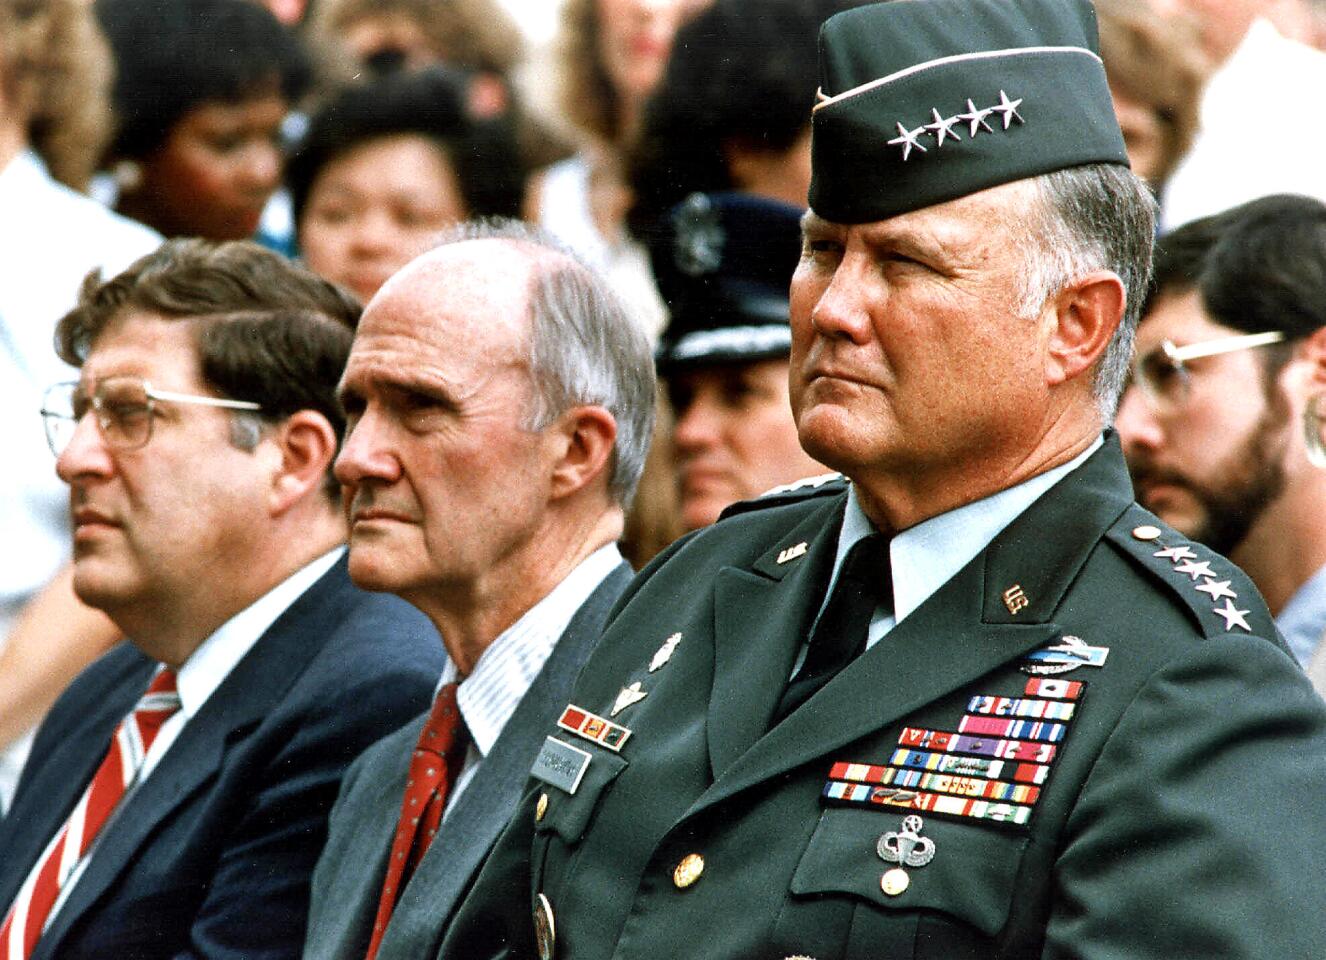 Gen. Norman Schwarzkopf, right, commander of Operation Desert Shield, sits next to National Security Advisor Brent Scowcroft, center, and White House Chief of Staff John Sununu at the Pentagon in 1990.